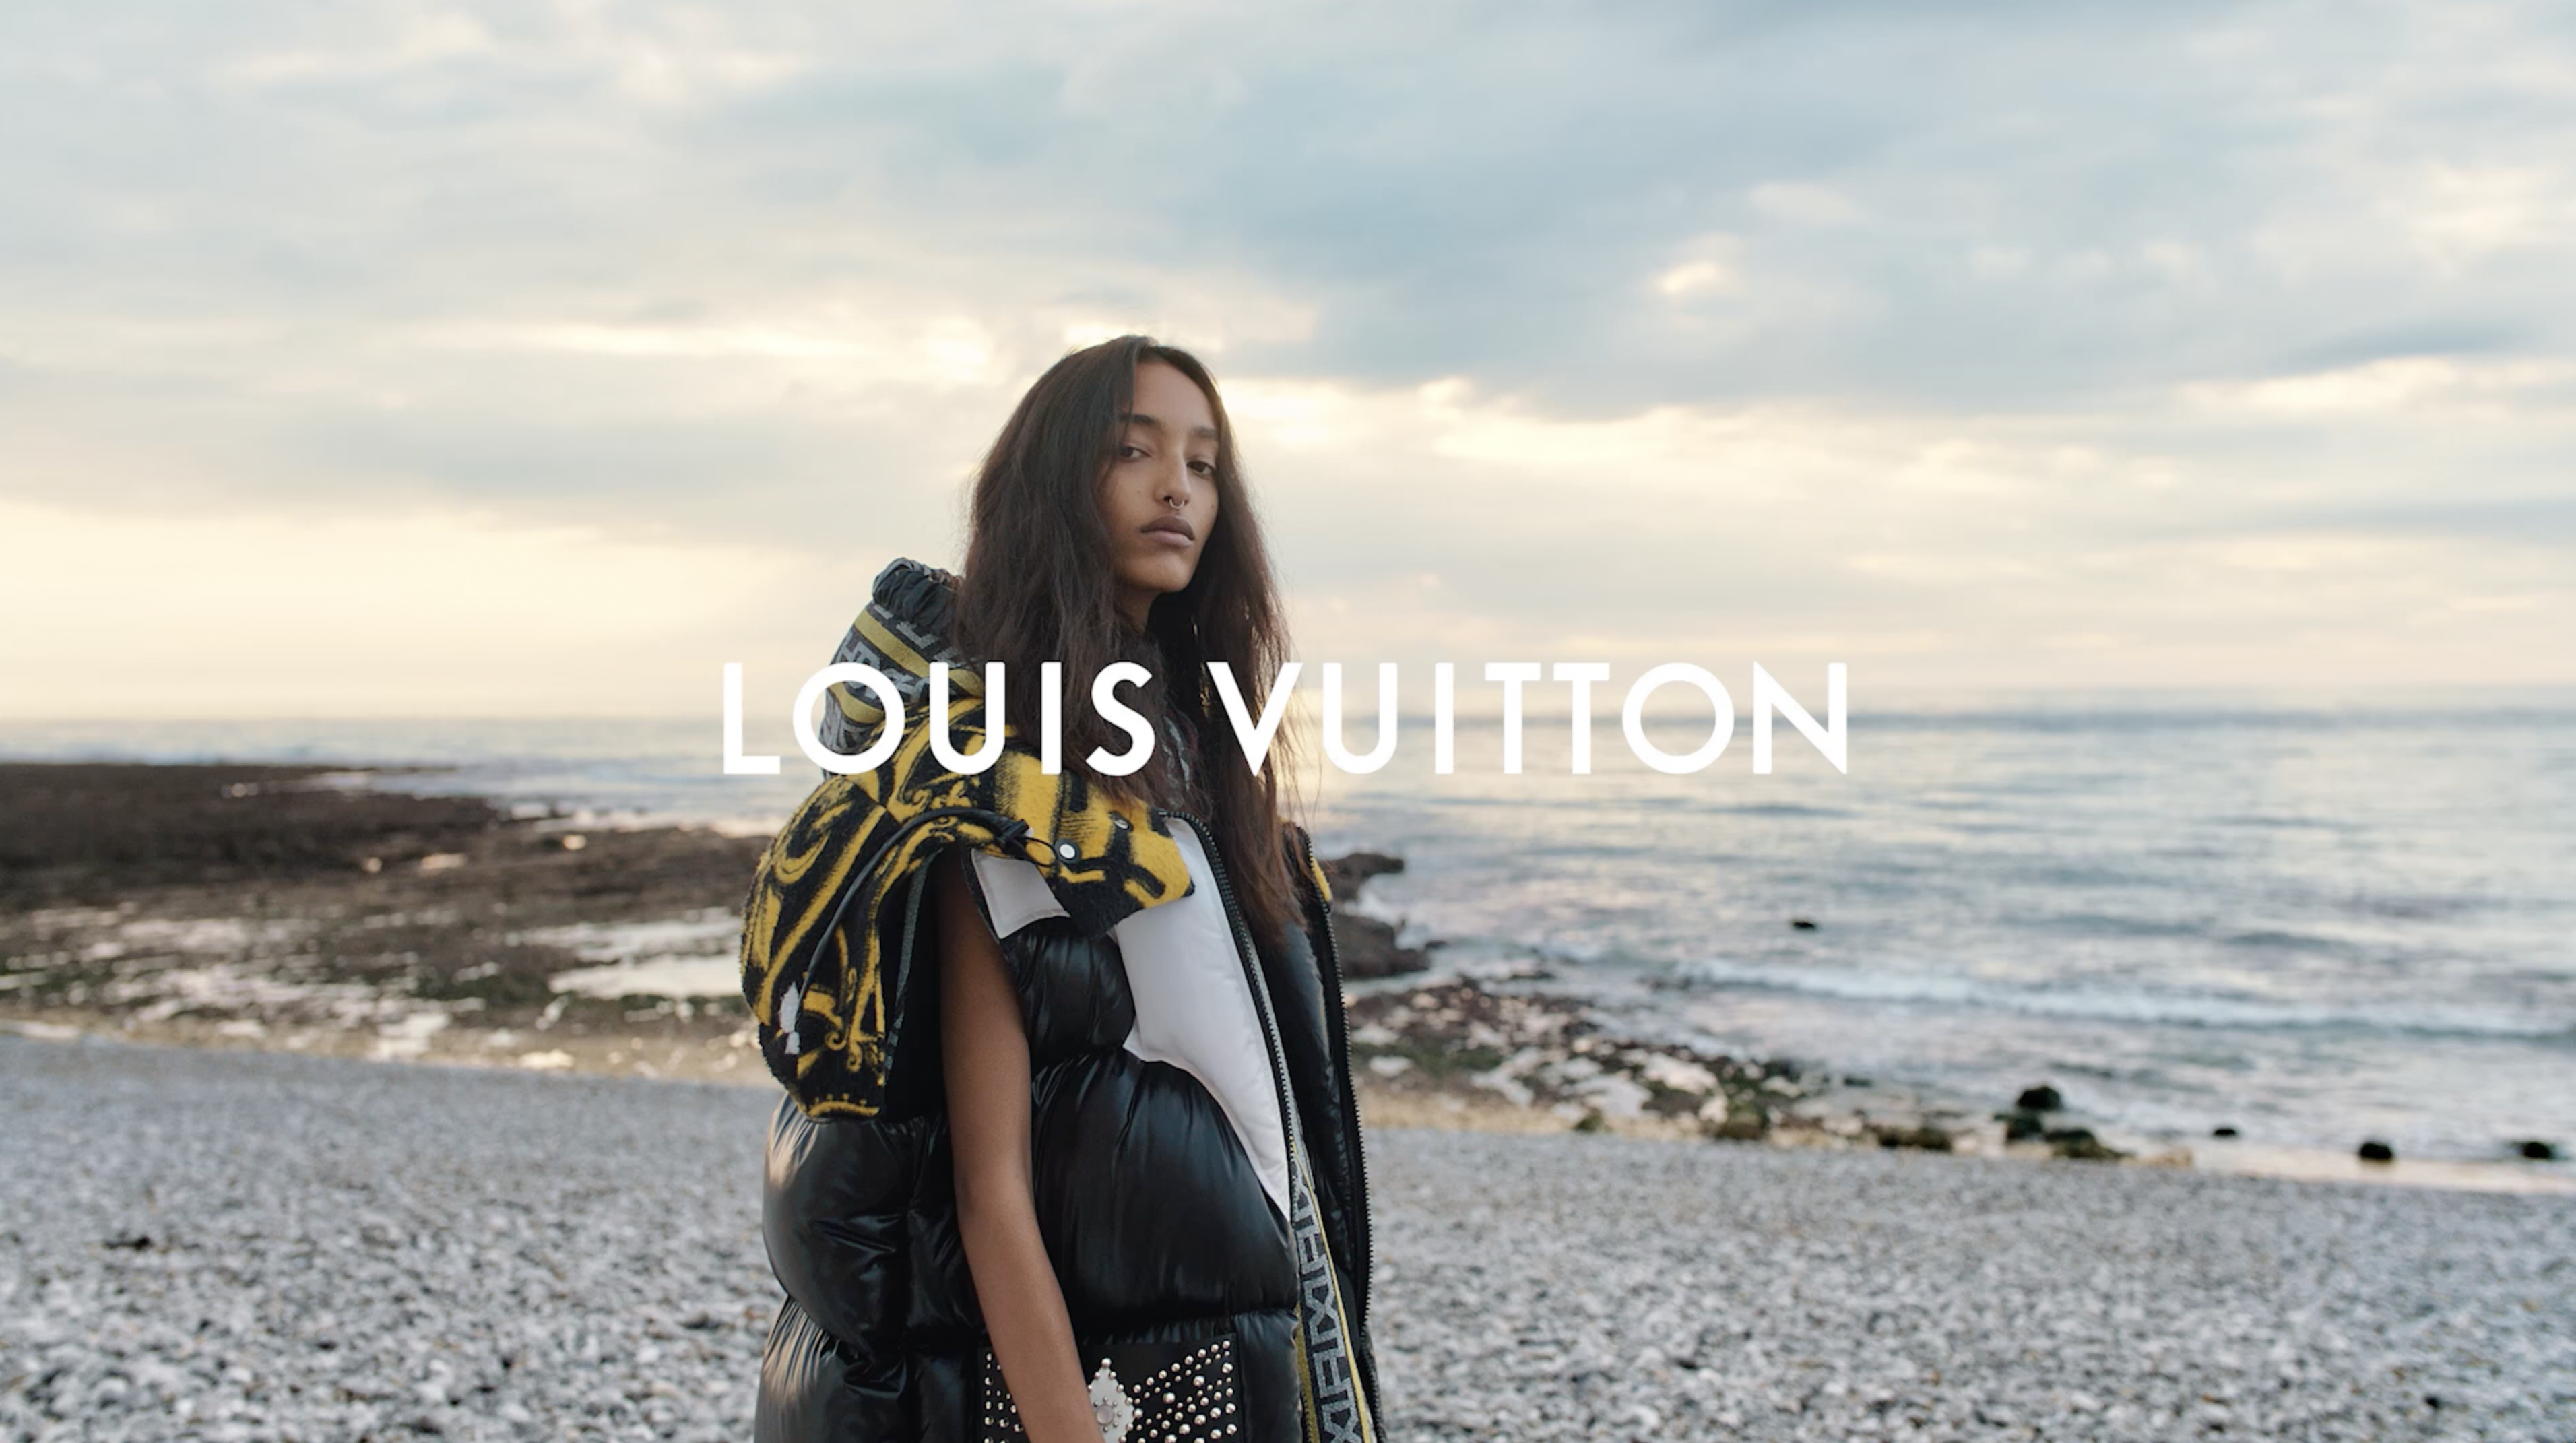 Louis Vuitton Voyage Fall 2021 Ad Campaign